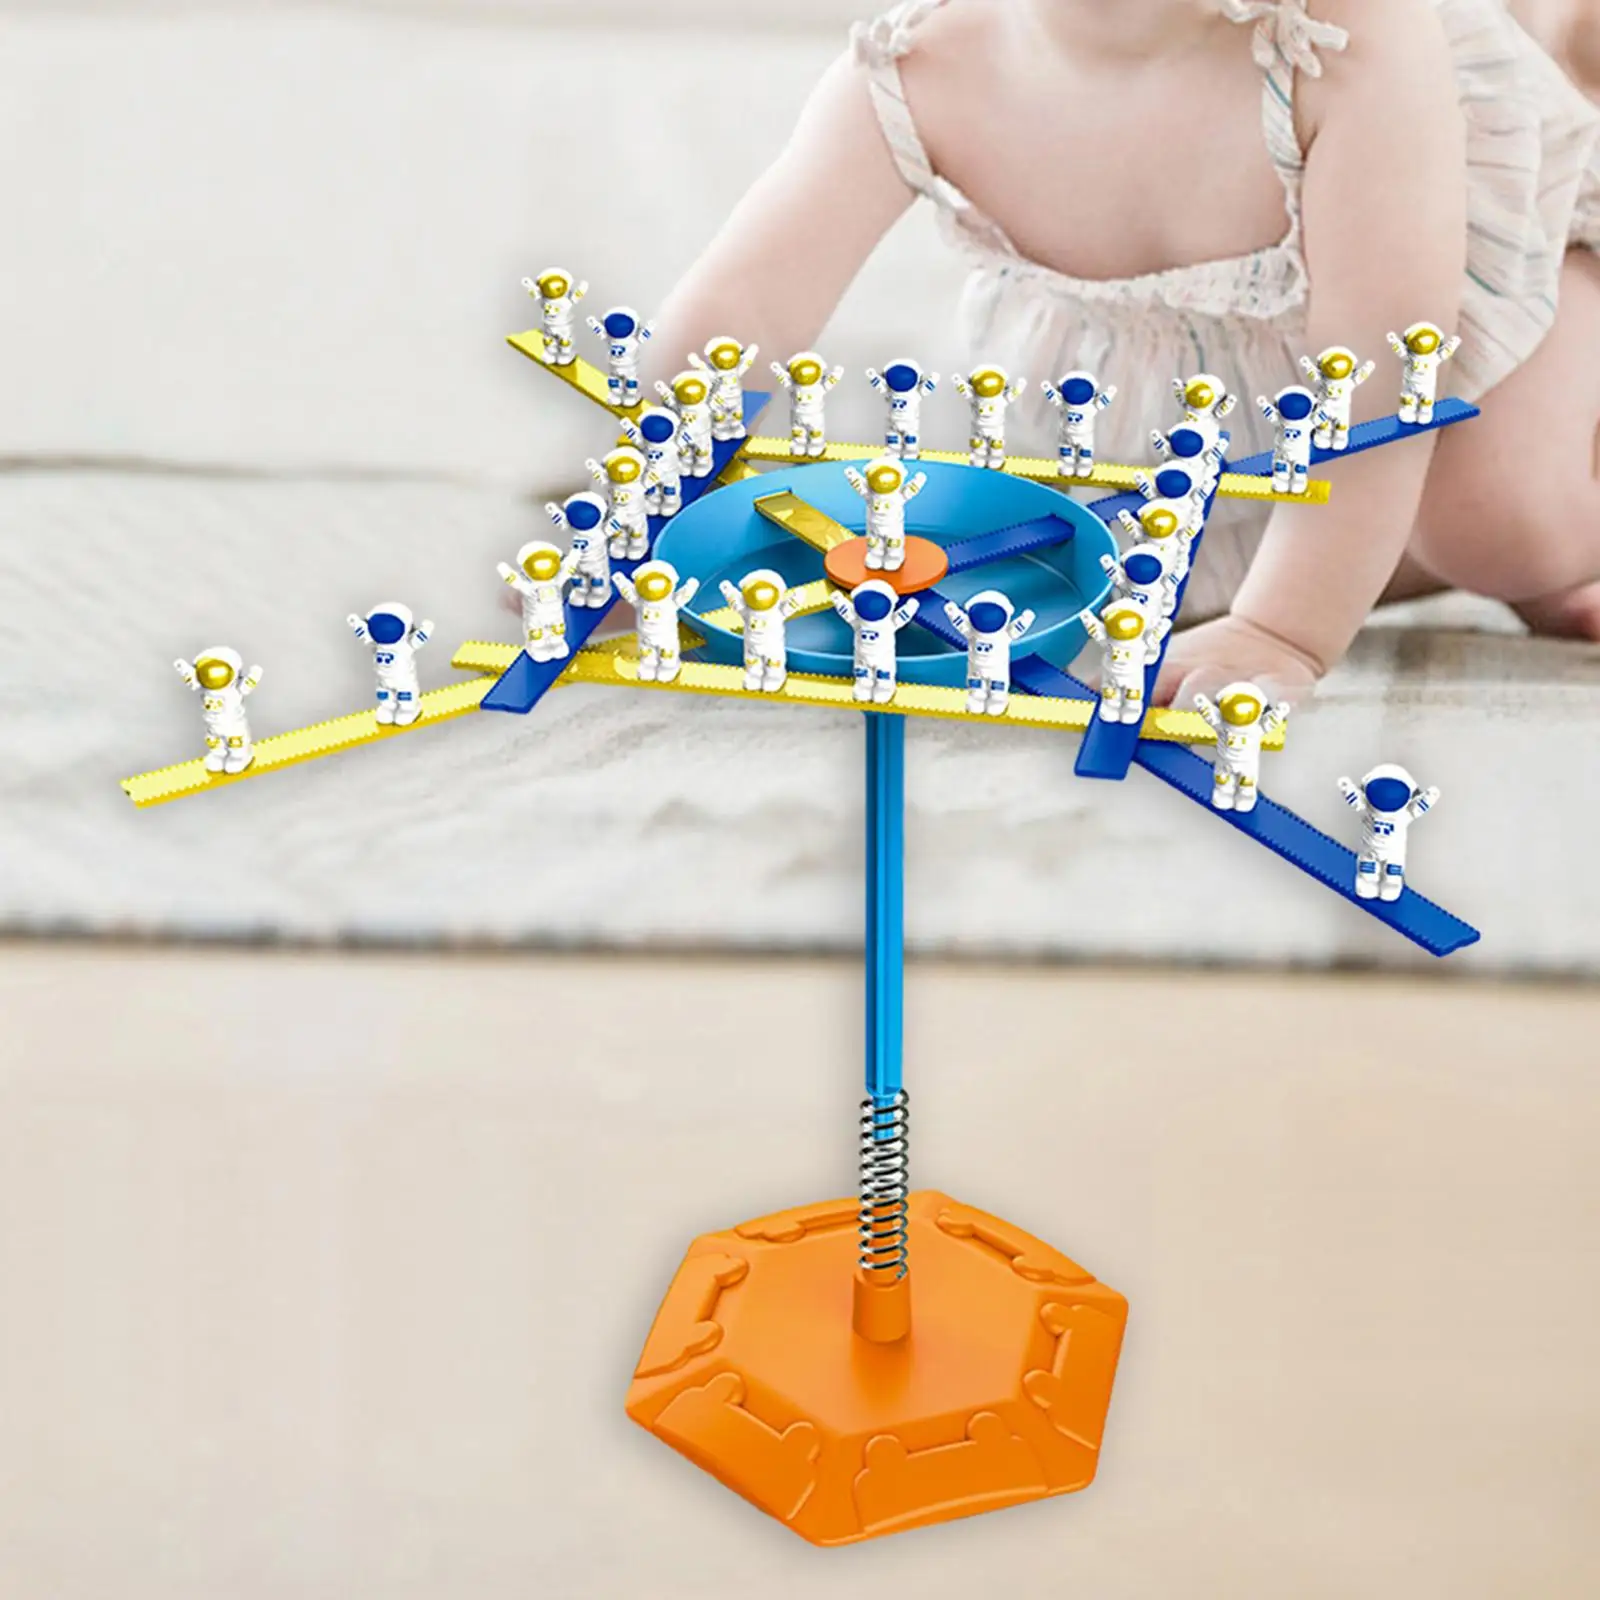 Astronaut Balance Stacking Blocks Game Stacker Game with 40 Spaceman Sensory Toy Develops Motor Skills for Age 4 5 6 Year Old